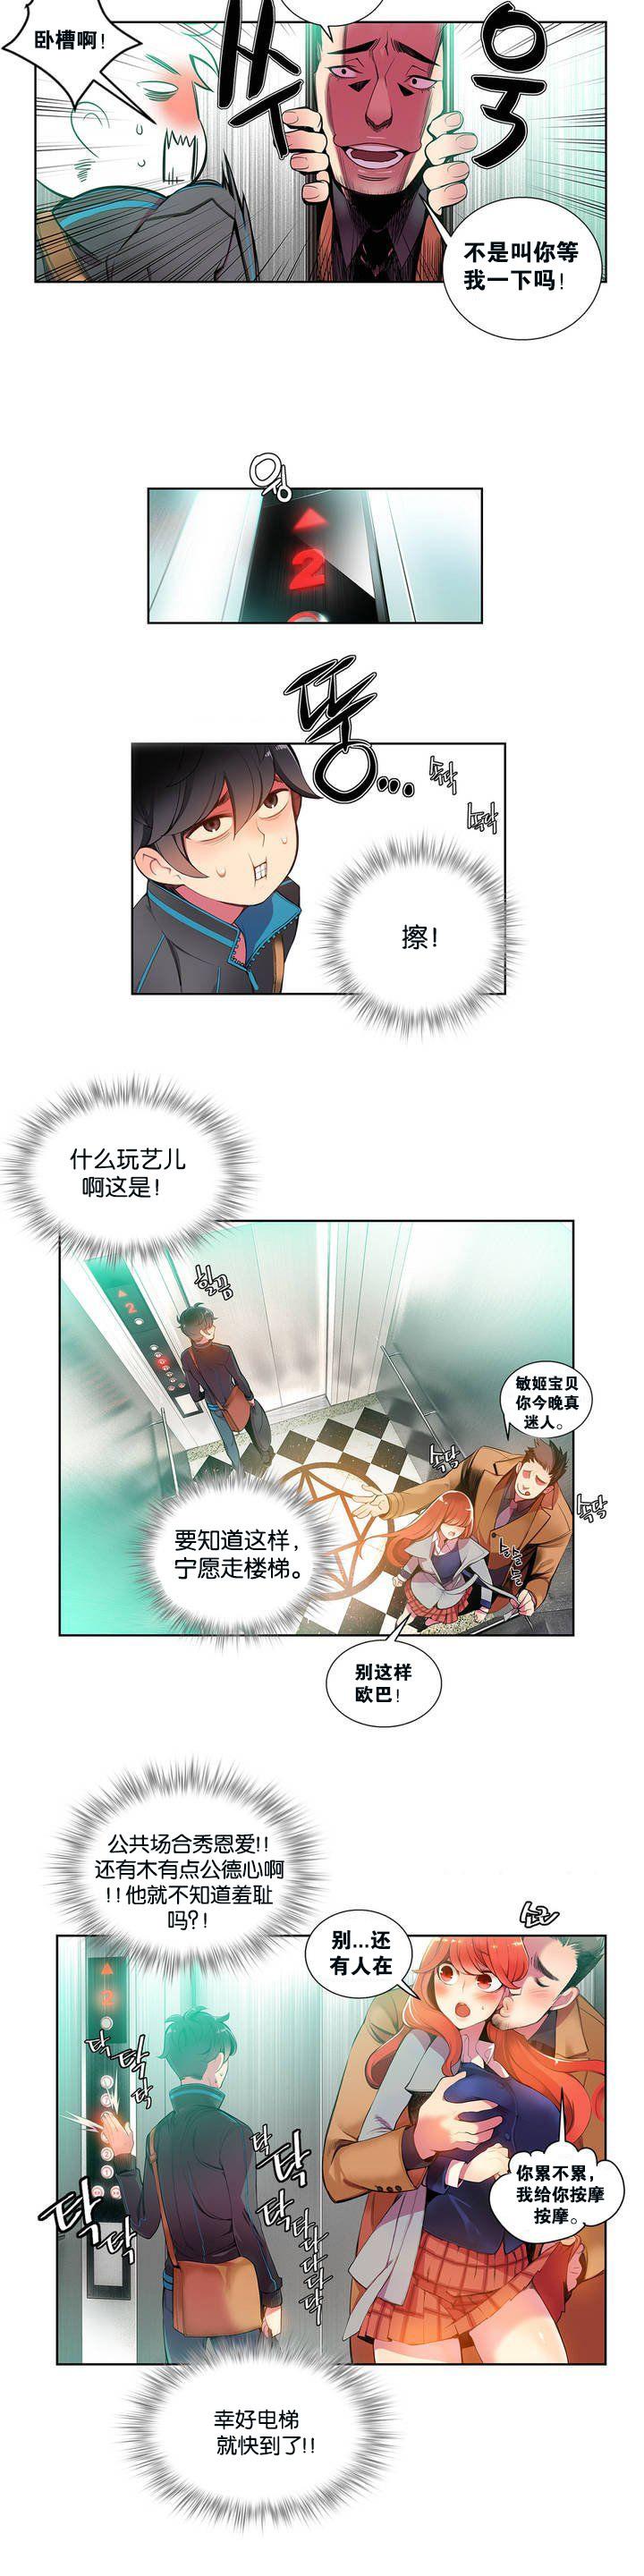 Tugging [Juder] 莉莉丝的纽带(Lilith`s Cord) Ch.1-16 [Chinese] 4some - Page 9